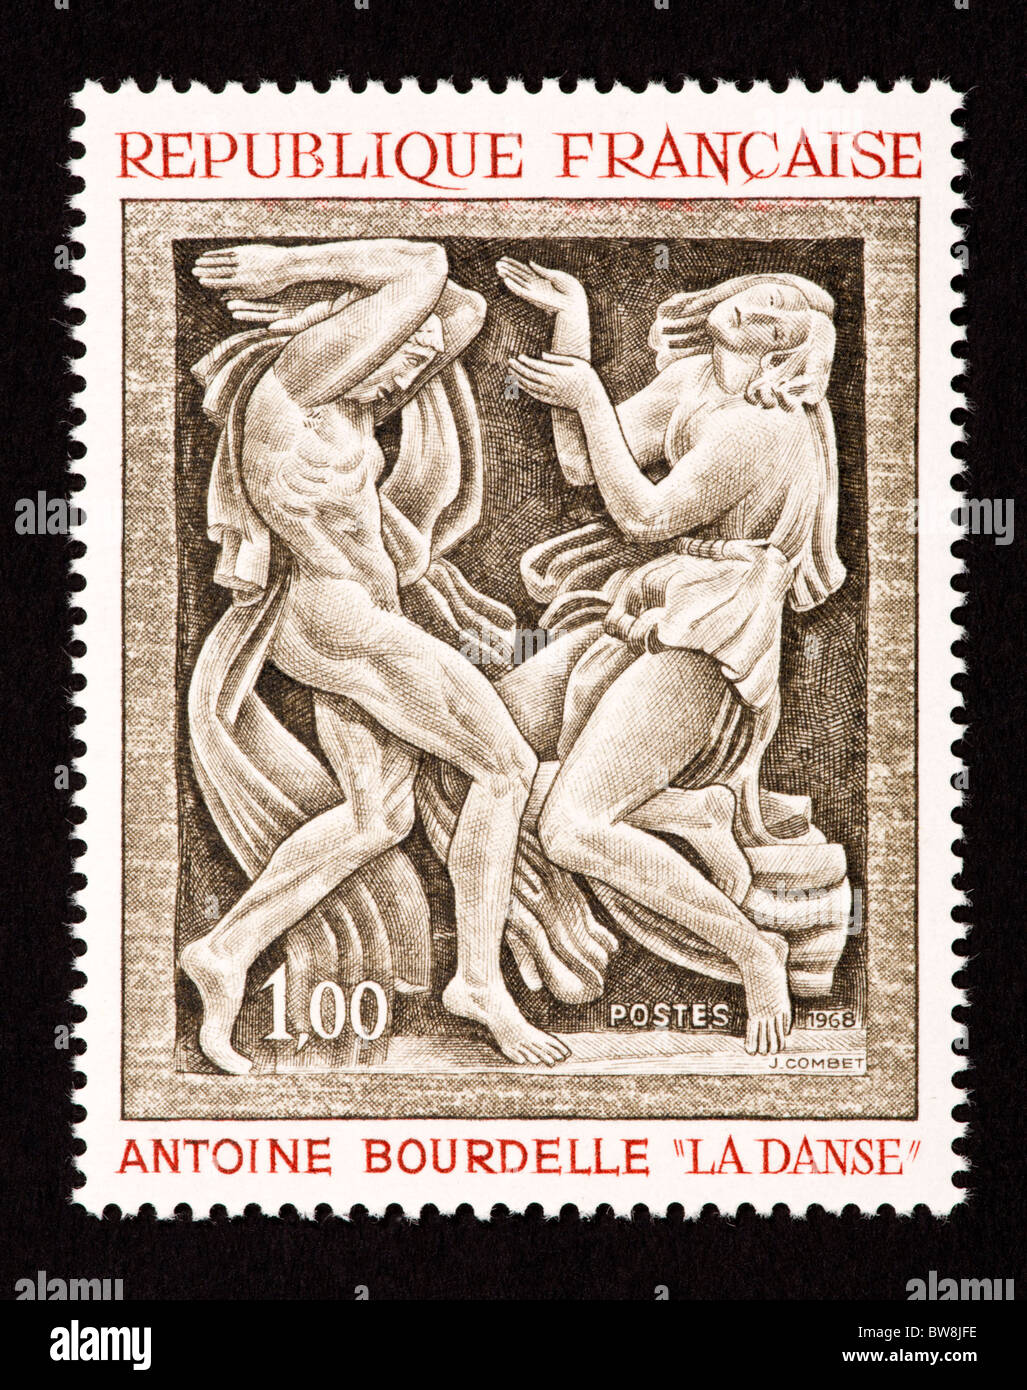 Postage stamp from France depicting sculpture of 'The Dance' by Emile Antoine Bourdelle. Stock Photo